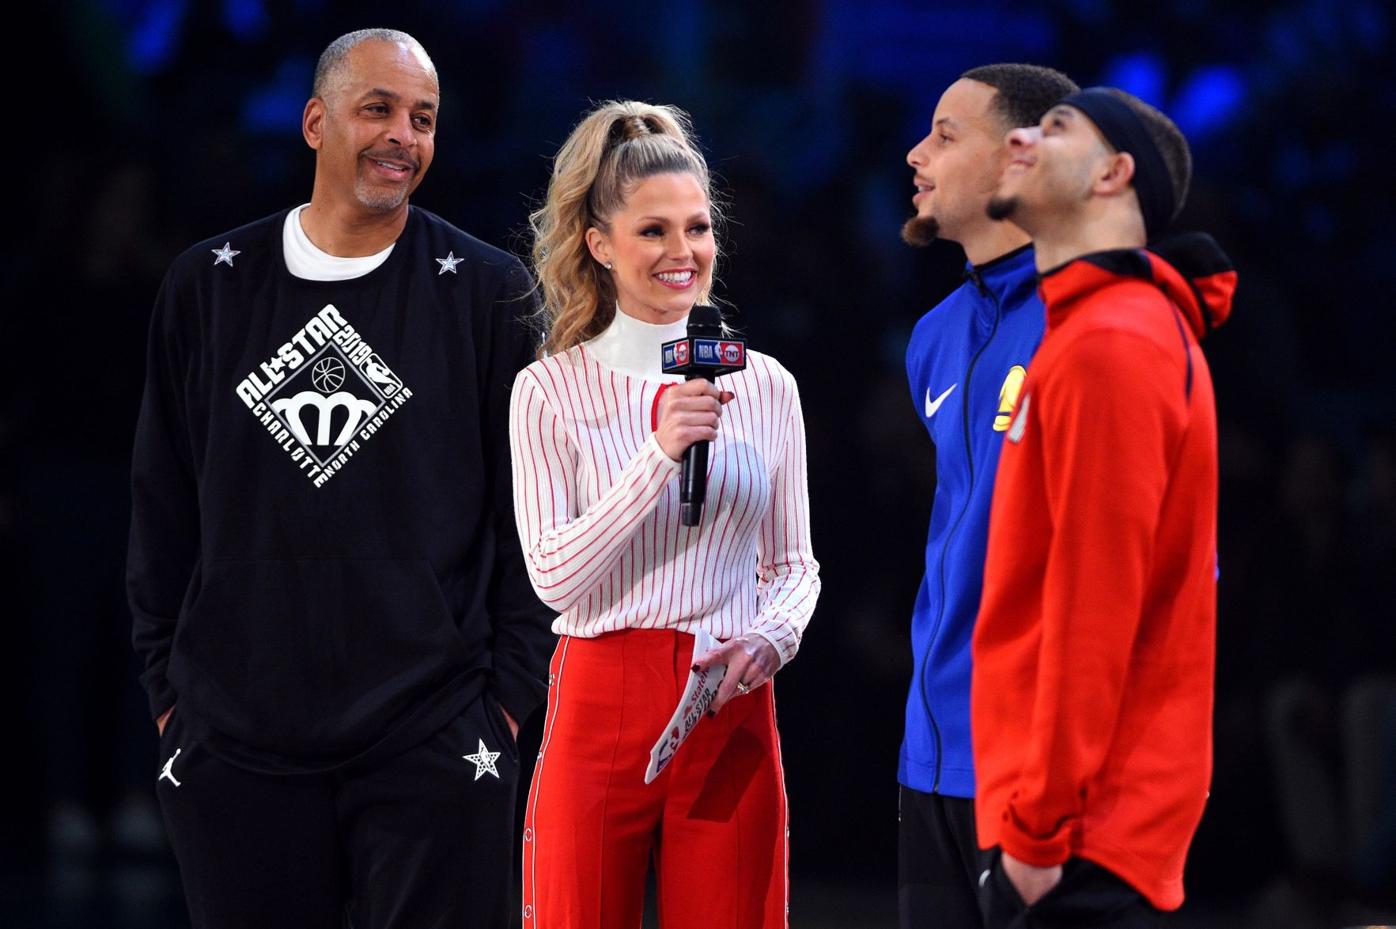 NBA Playoffs: Curry parents to flip coin to figure out who to root for